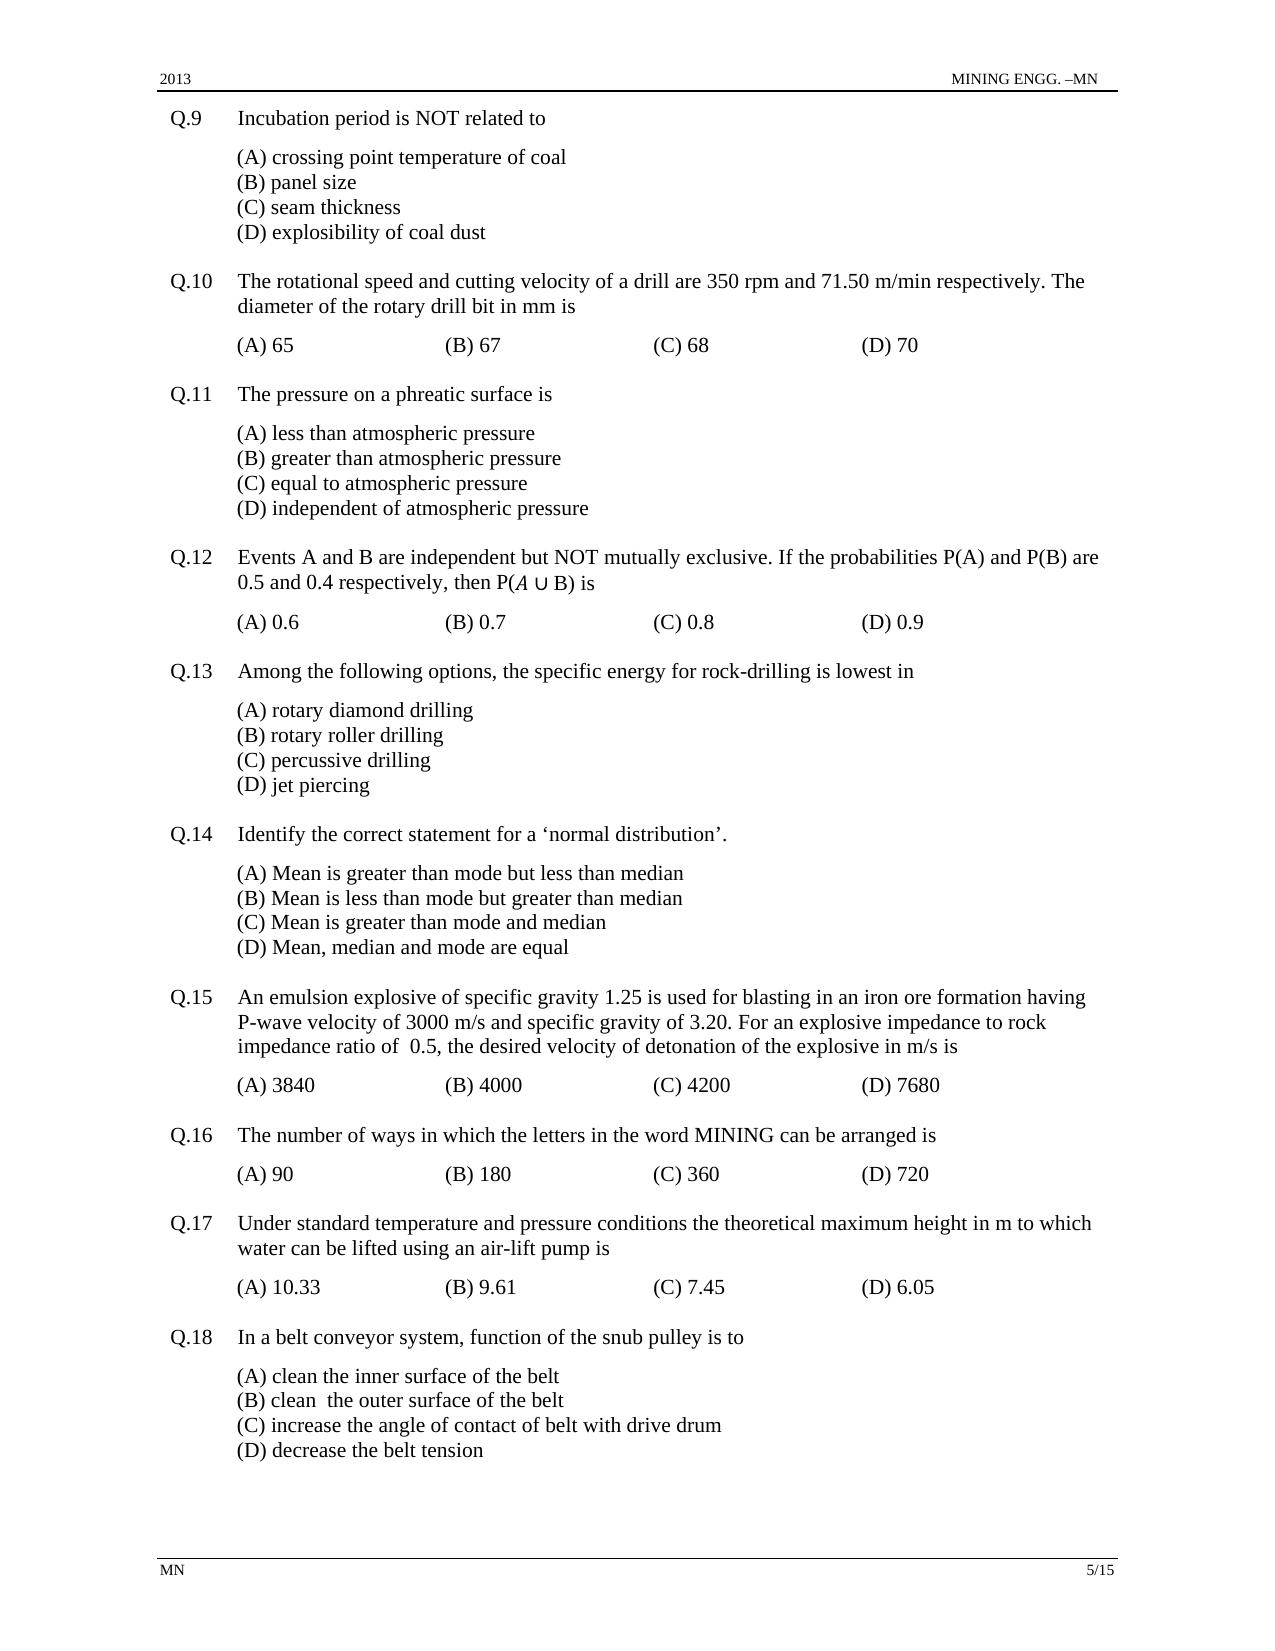 GATE 2013 Mining Engineering (MN) Question Paper with Answer Key - Page 5